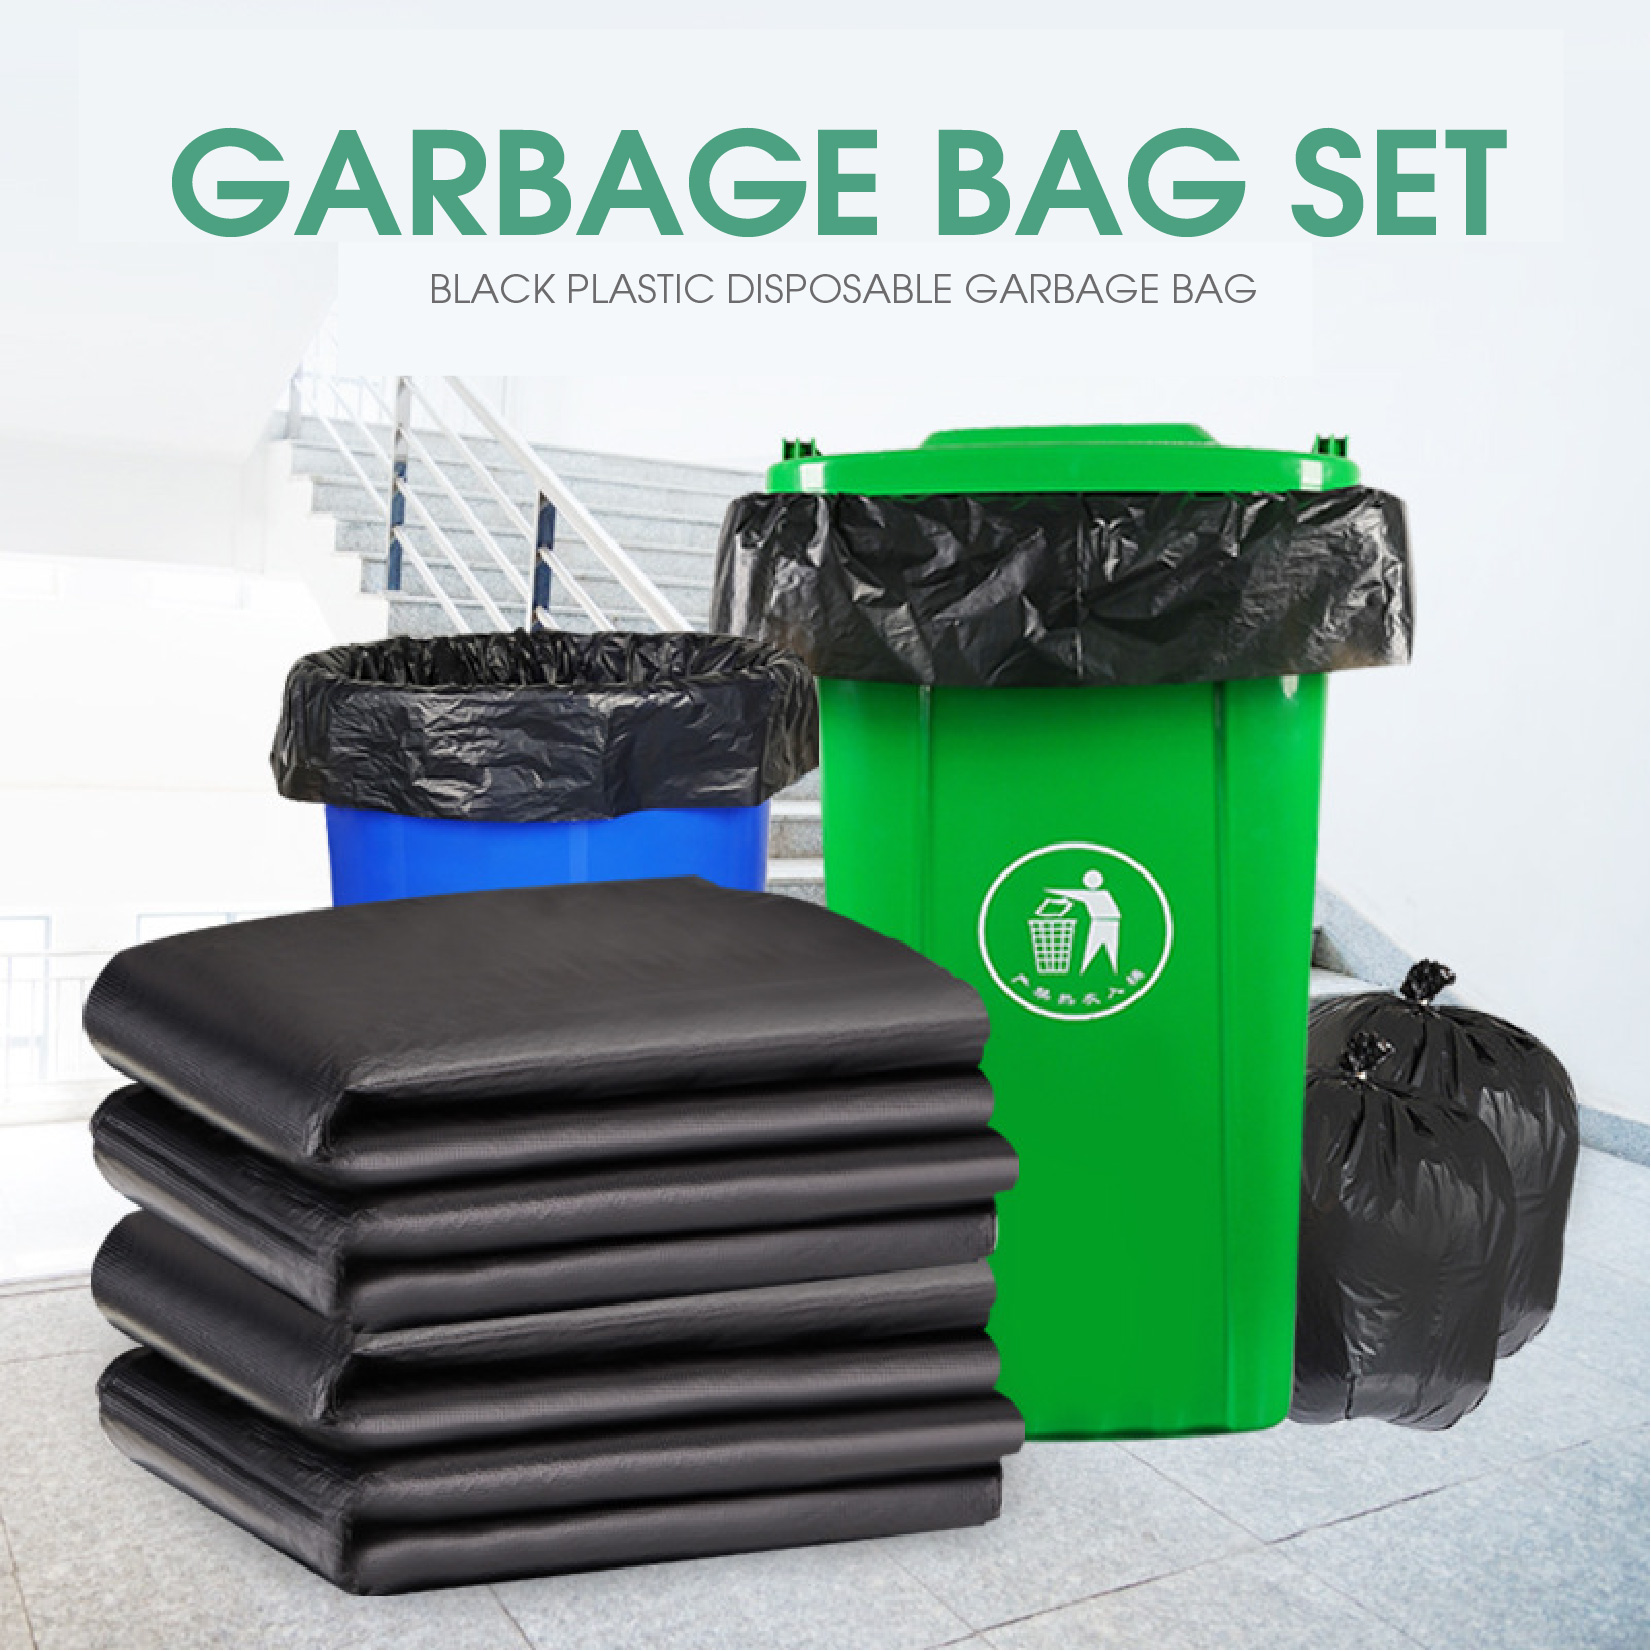 EMBRACE PH Garbage Bag Disposable Trash Bag 25 to 50 PCS per PACK Sizes  Small to 5XL Plastic Black Garbage Bag Extra Thick Durable Waterproof  Leakage Proof not easy to Tear Garbage